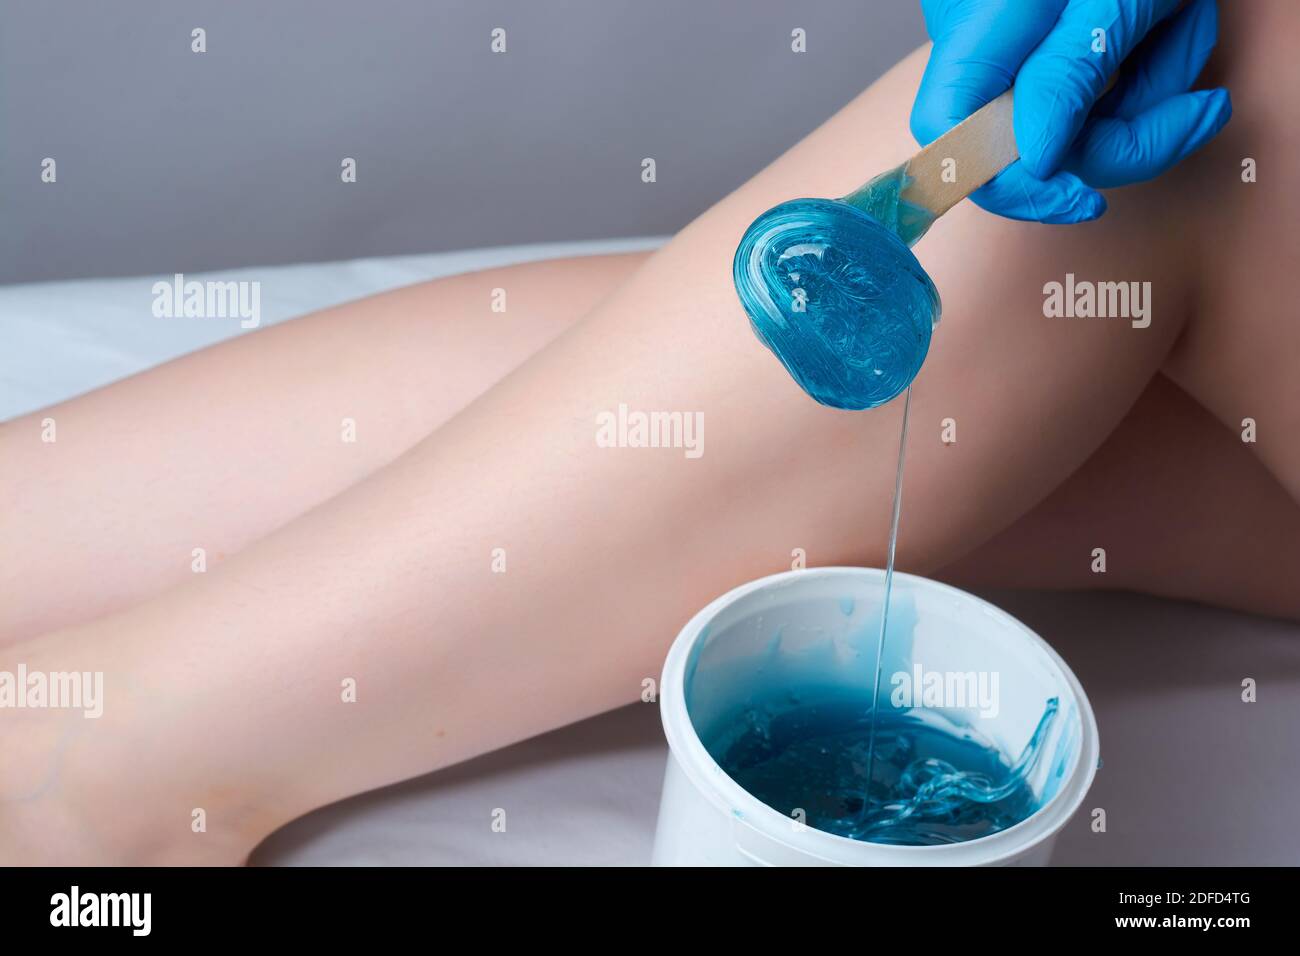 the procedure shugaring legs.the application of blue sugar paste.depilation in the salon Stock Photo